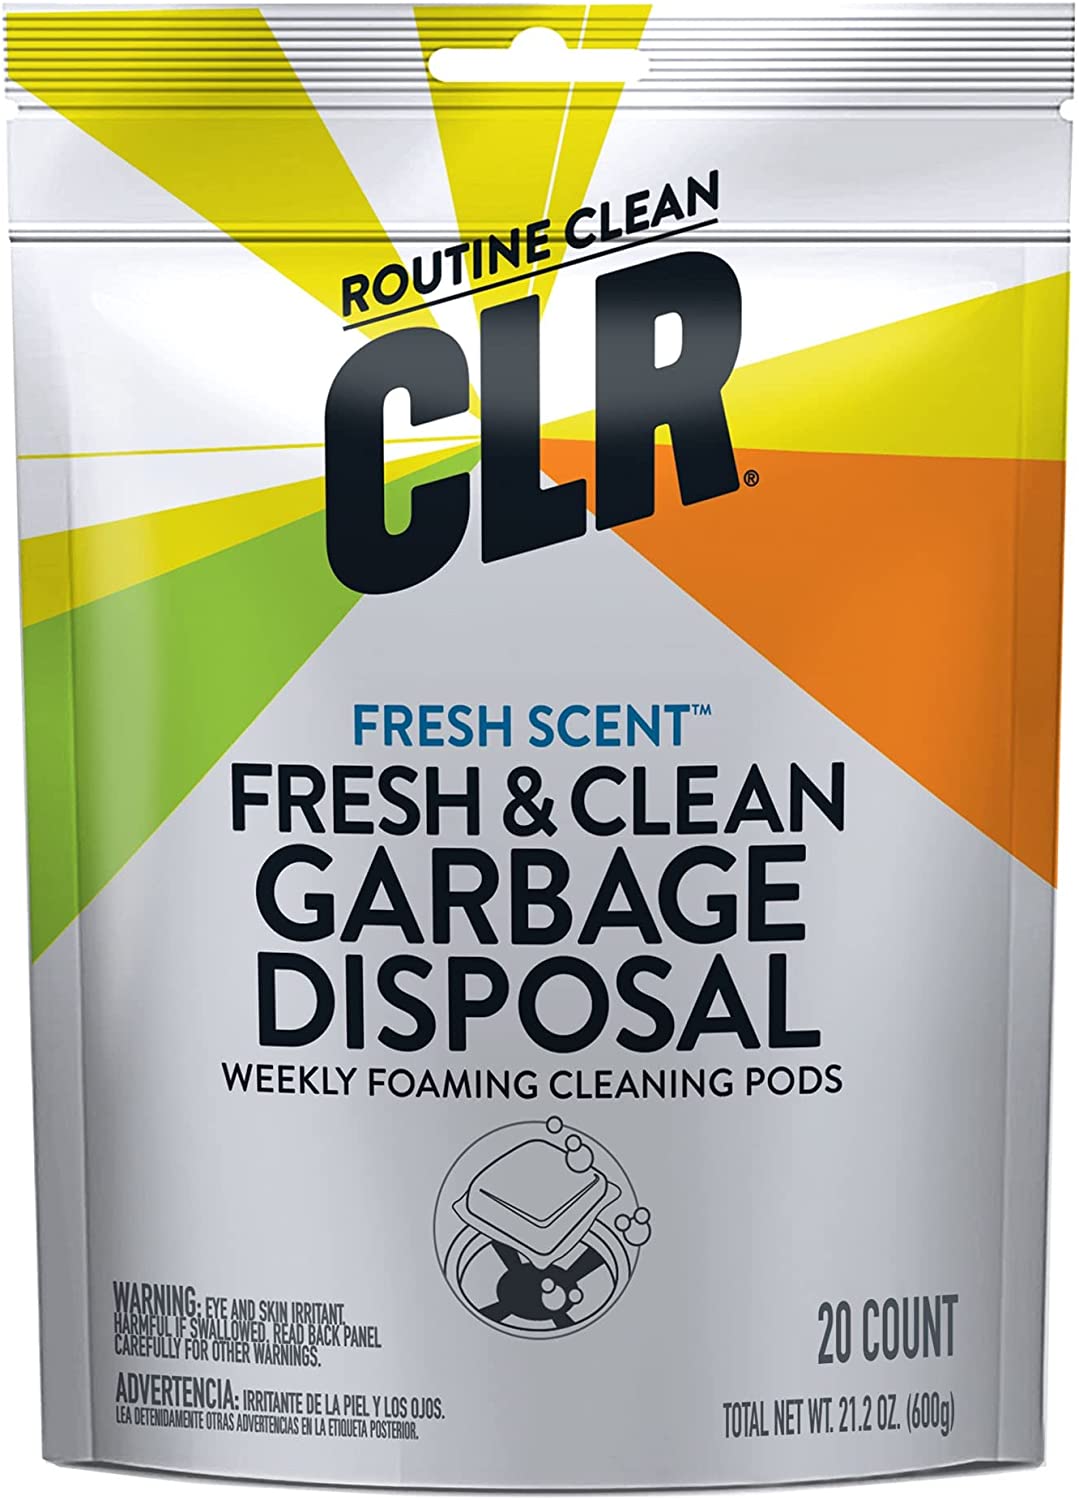 CLR Garbage Disposal Cleaner and Deodorizer Pods, 20 Count, Fresh Scent Foaming Drain Odor Eliminator - 5 Month Supply